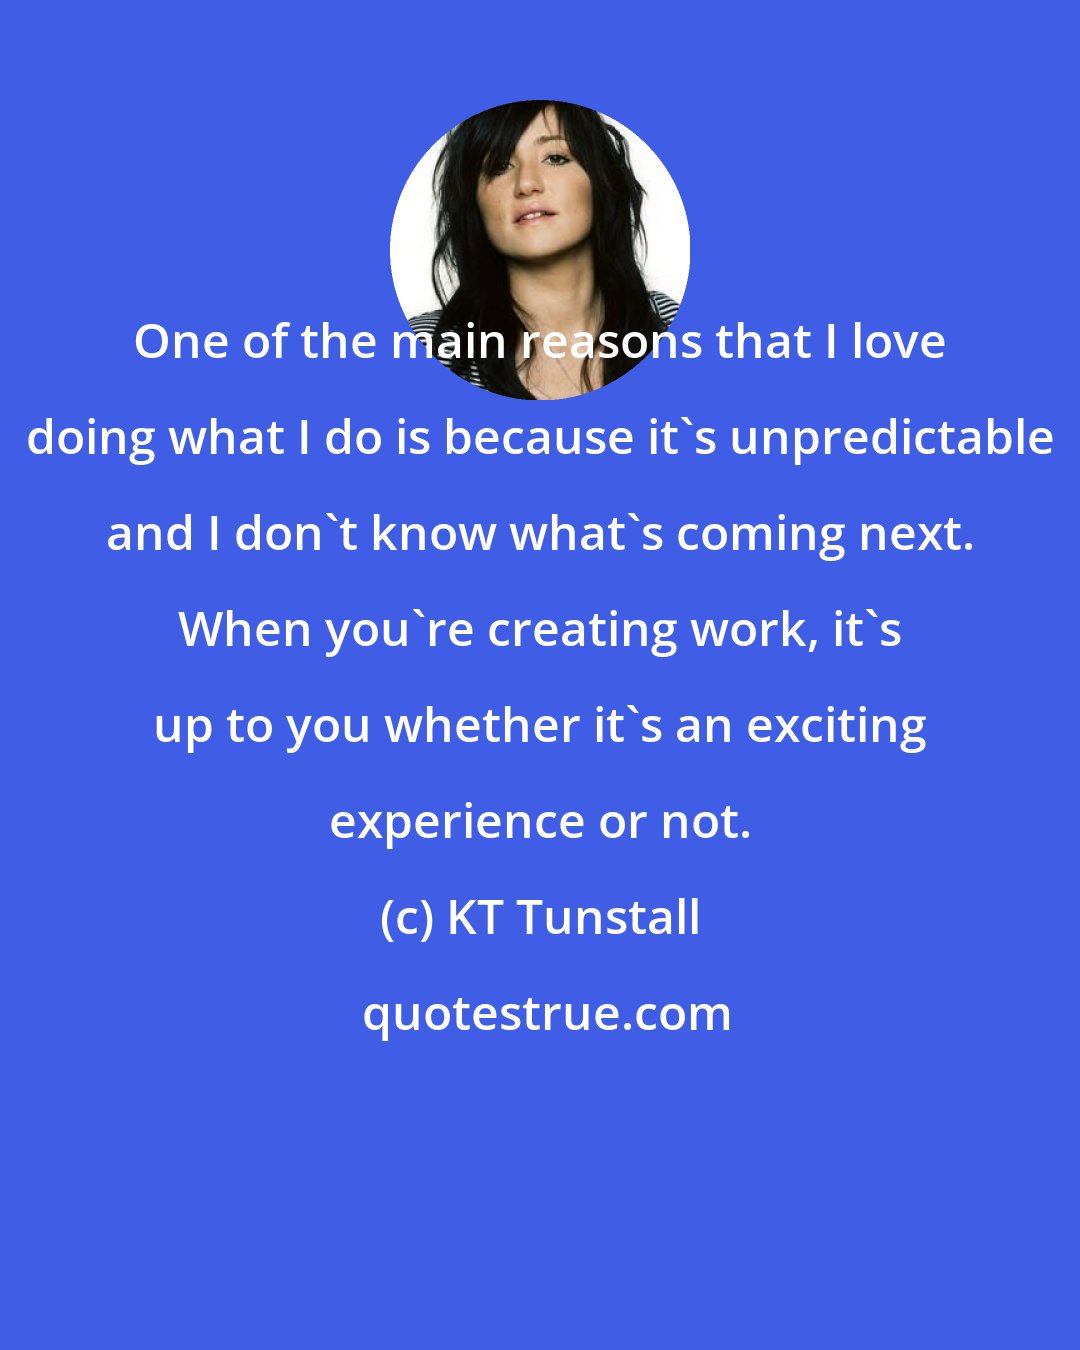 KT Tunstall: One of the main reasons that I love doing what I do is because it's unpredictable and I don't know what's coming next. When you're creating work, it's up to you whether it's an exciting experience or not.